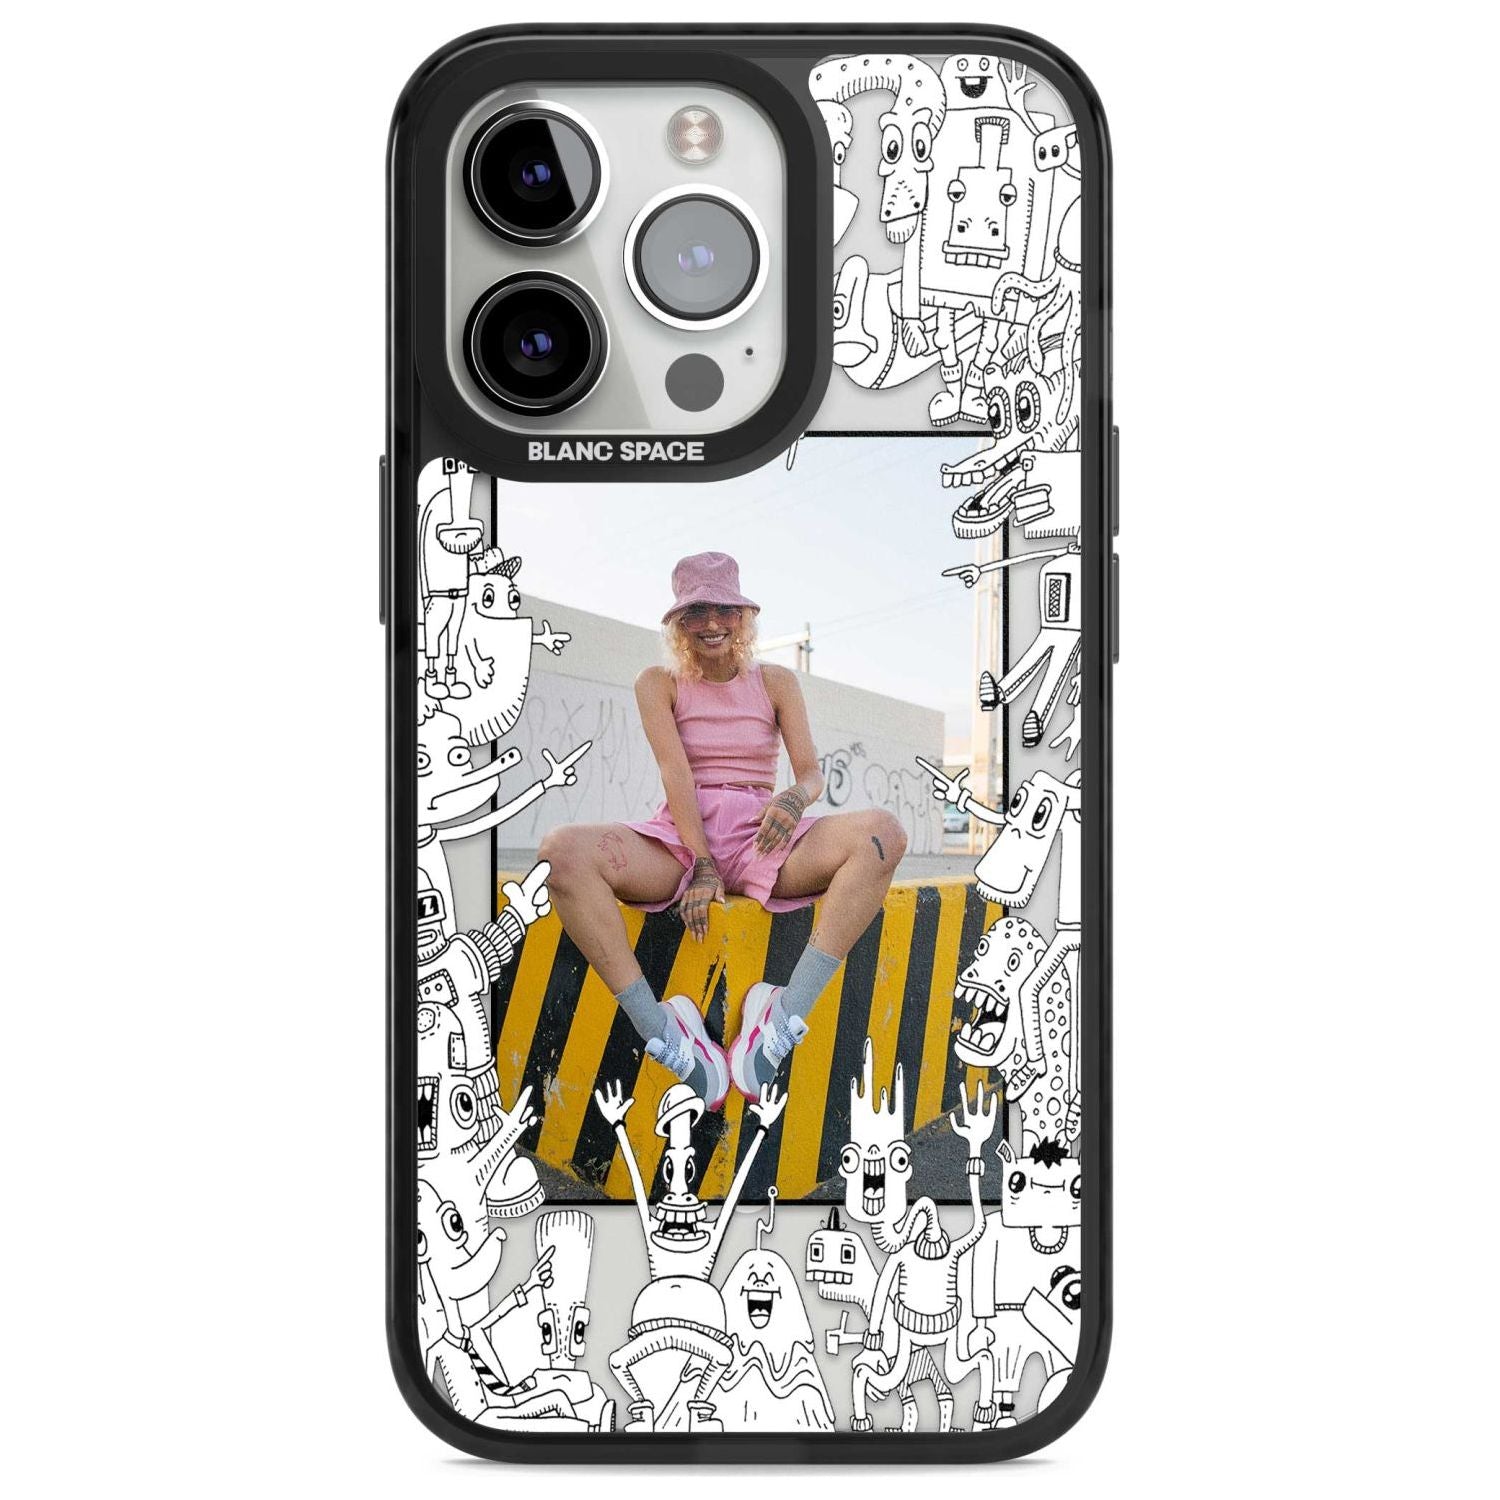 Personalised Look At This Photo Case Custom Phone Case iPhone 15 Pro Max / Magsafe Black Impact Case,iPhone 15 Pro / Magsafe Black Impact Case,iPhone 14 Pro Max / Magsafe Black Impact Case,iPhone 14 Pro / Magsafe Black Impact Case,iPhone 13 Pro / Magsafe Black Impact Case Blanc Space